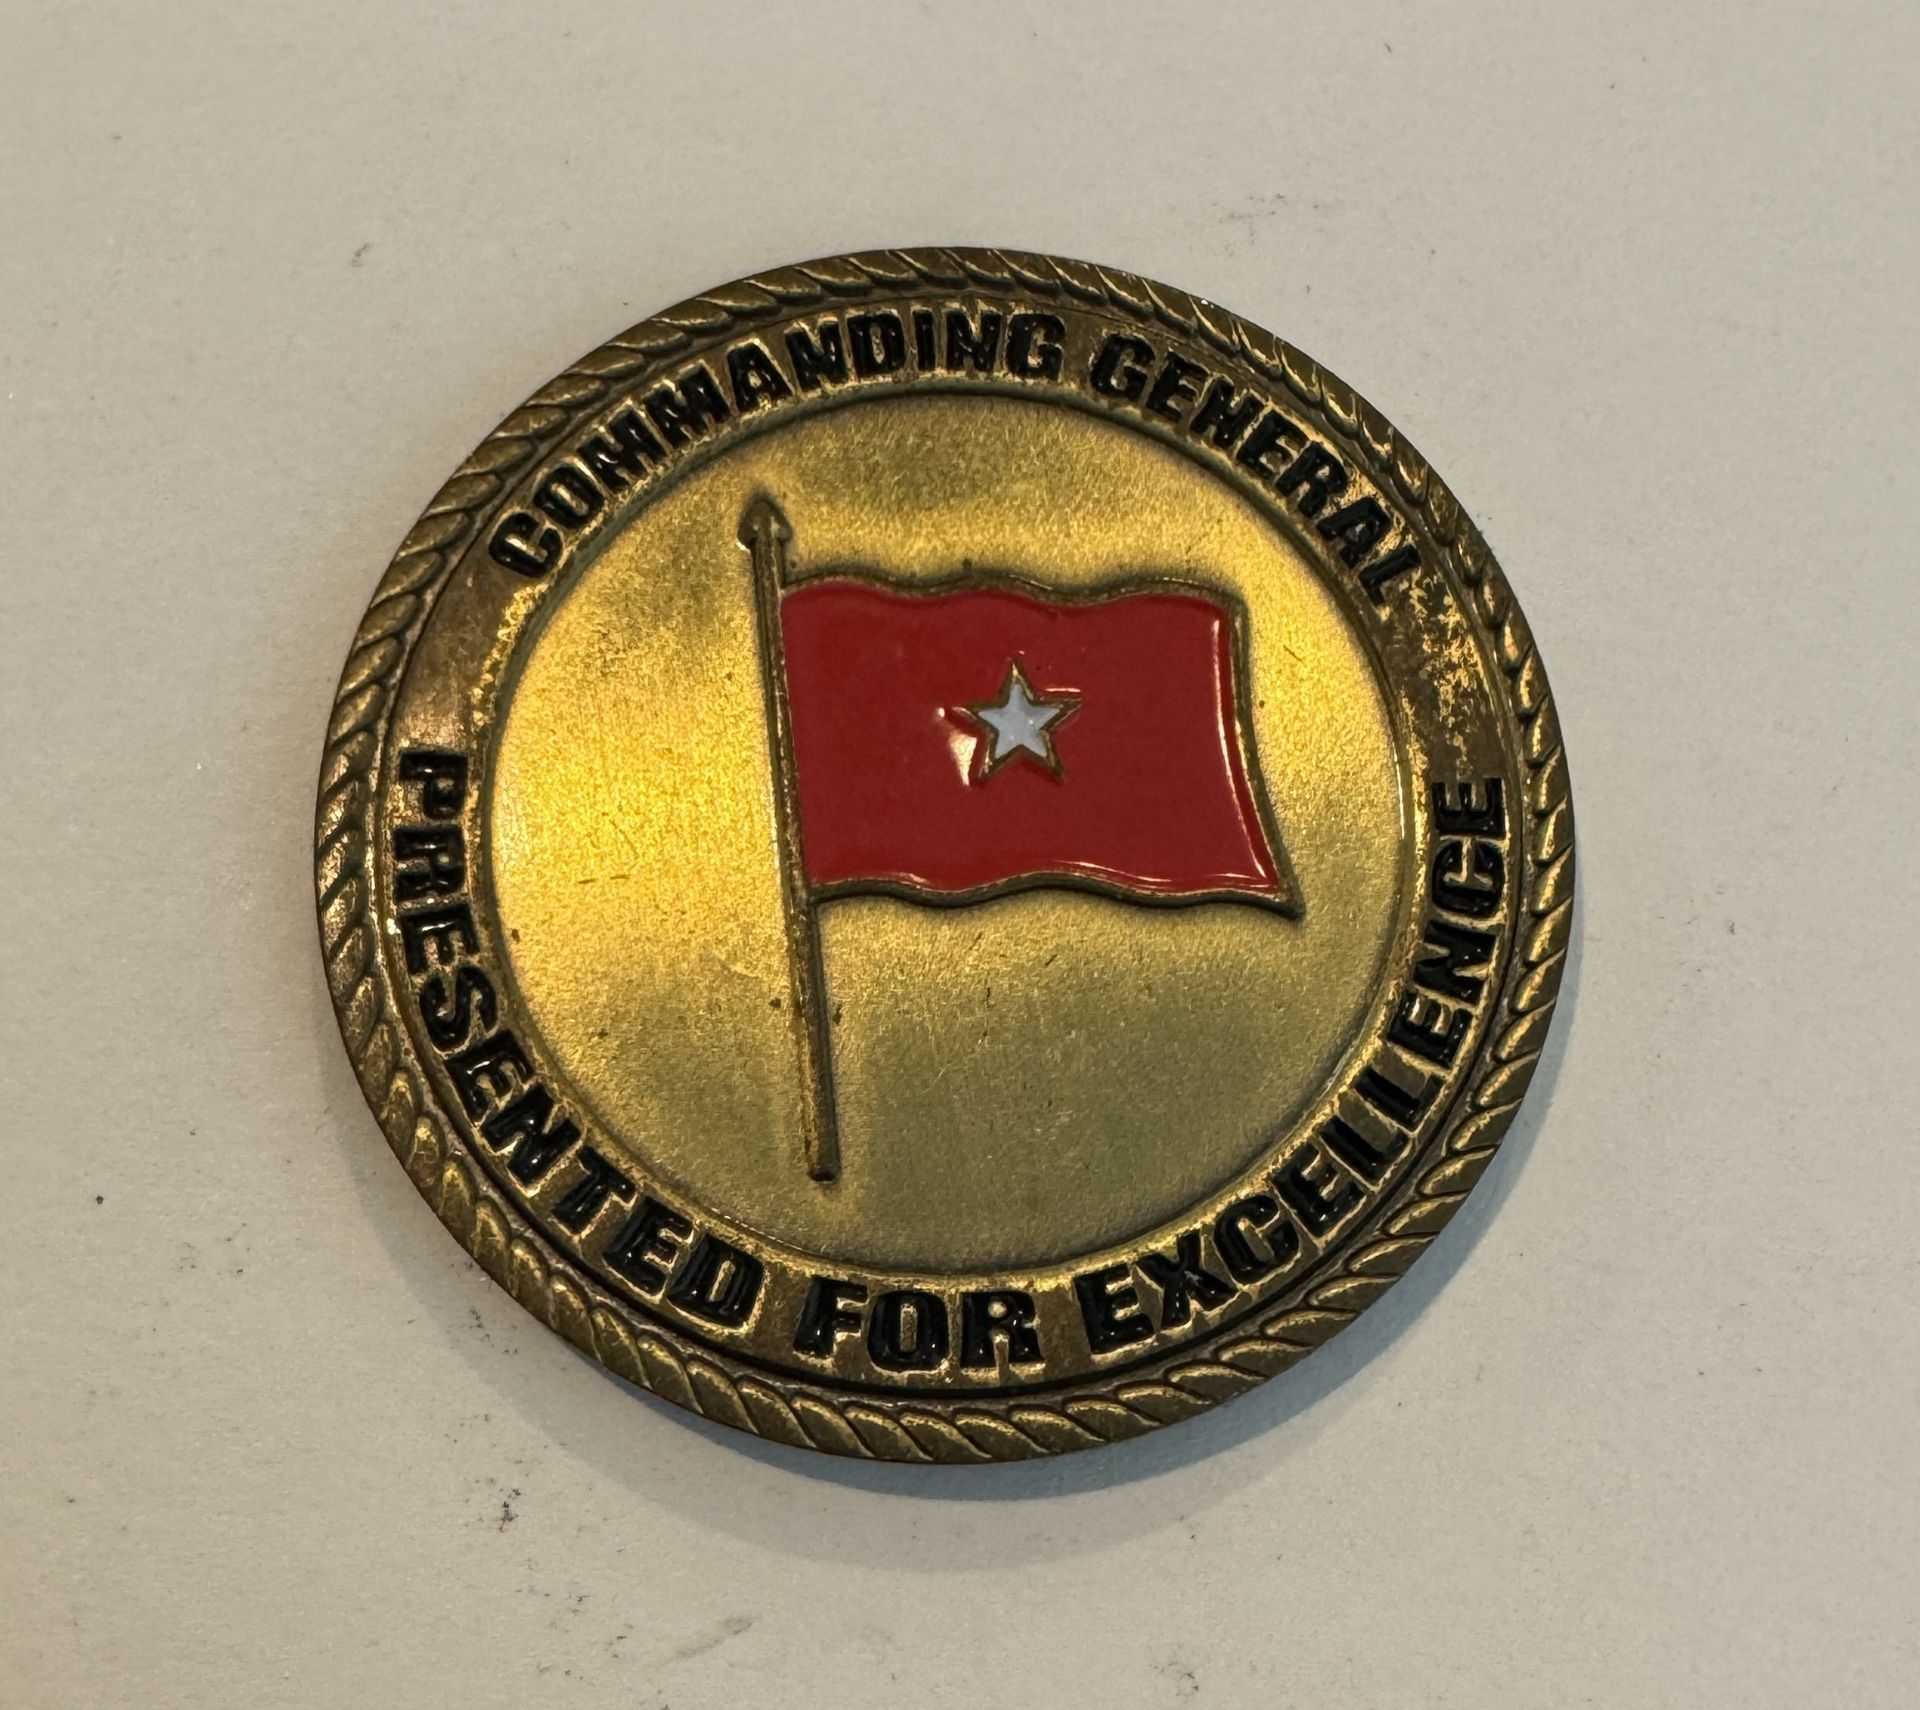 MARINES LOGISTICS GROUP CHALLENGE COIN - Image 2 of 2